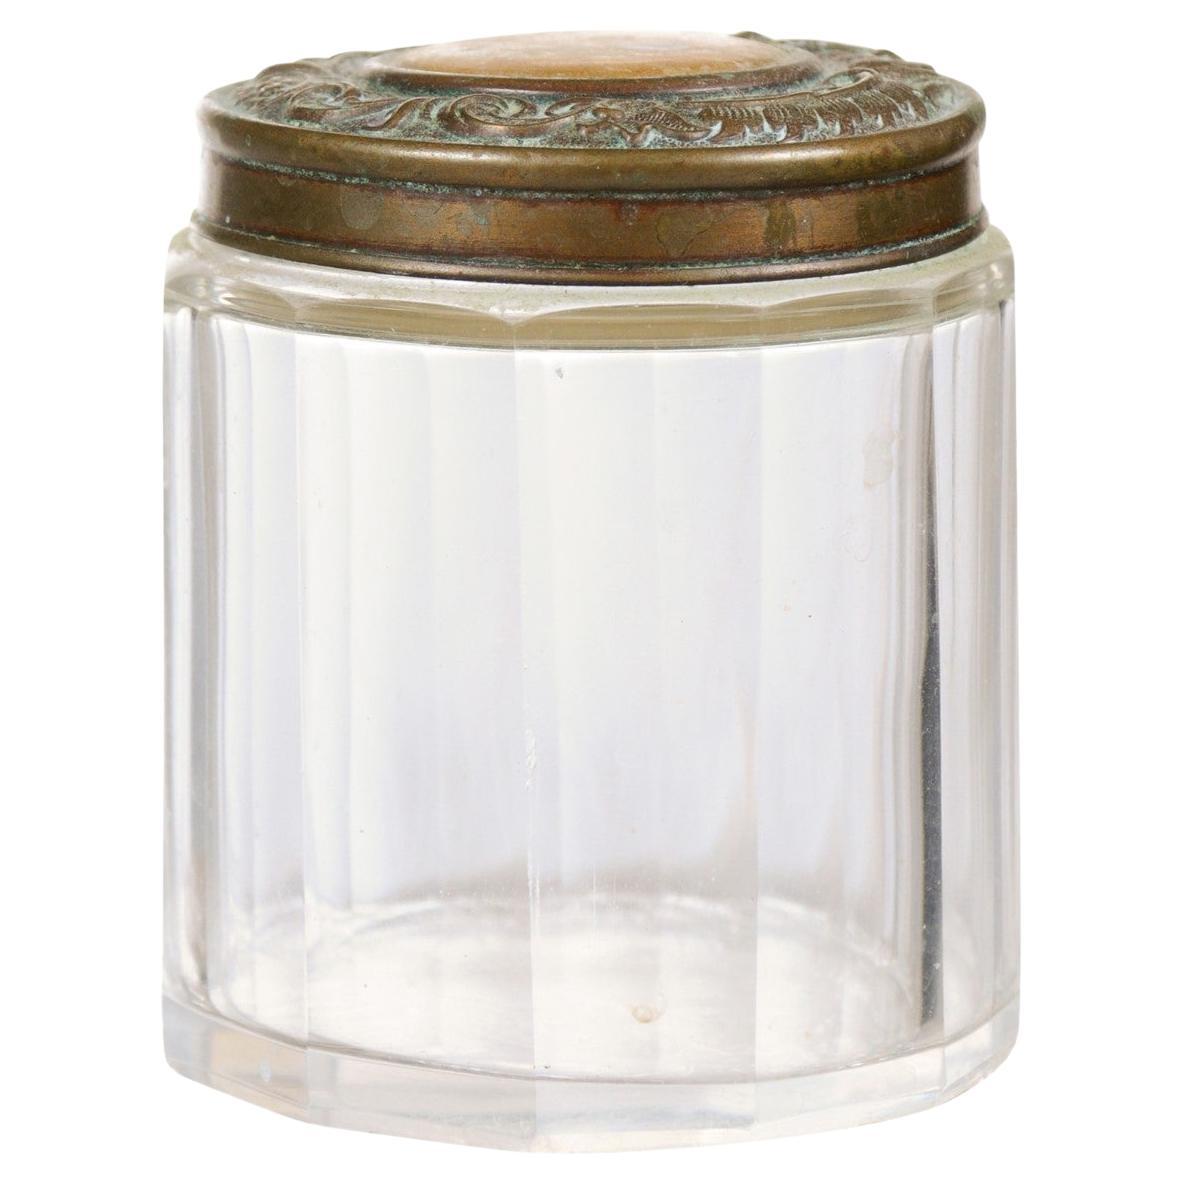 Small English 19th Century Glass Vanity Jar with Metal Lid and Faceted Design